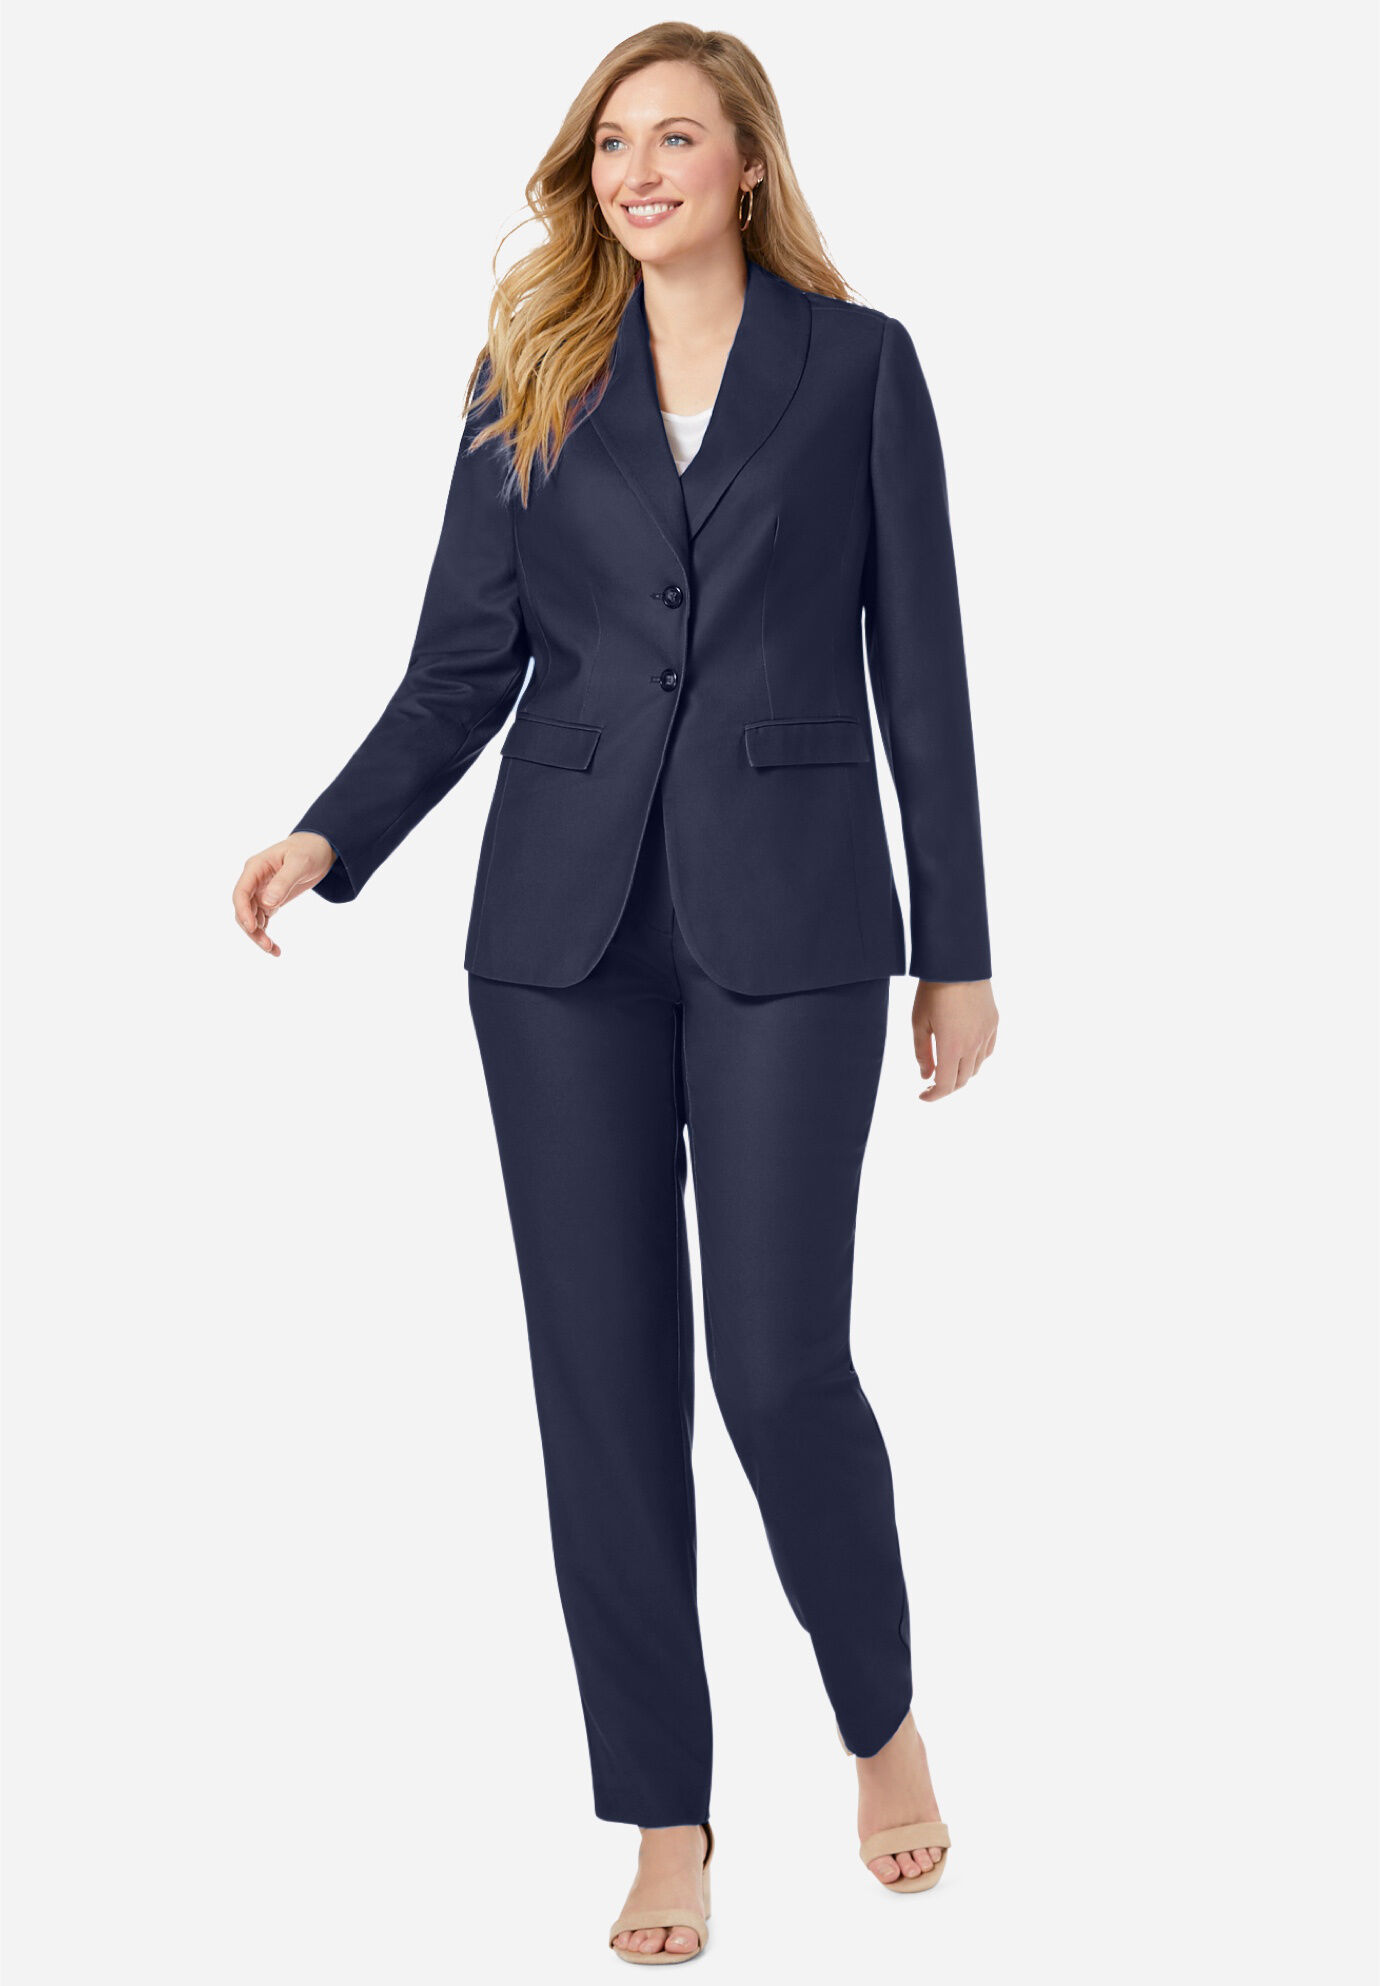 Plus Size Pant Suits | Woman Within